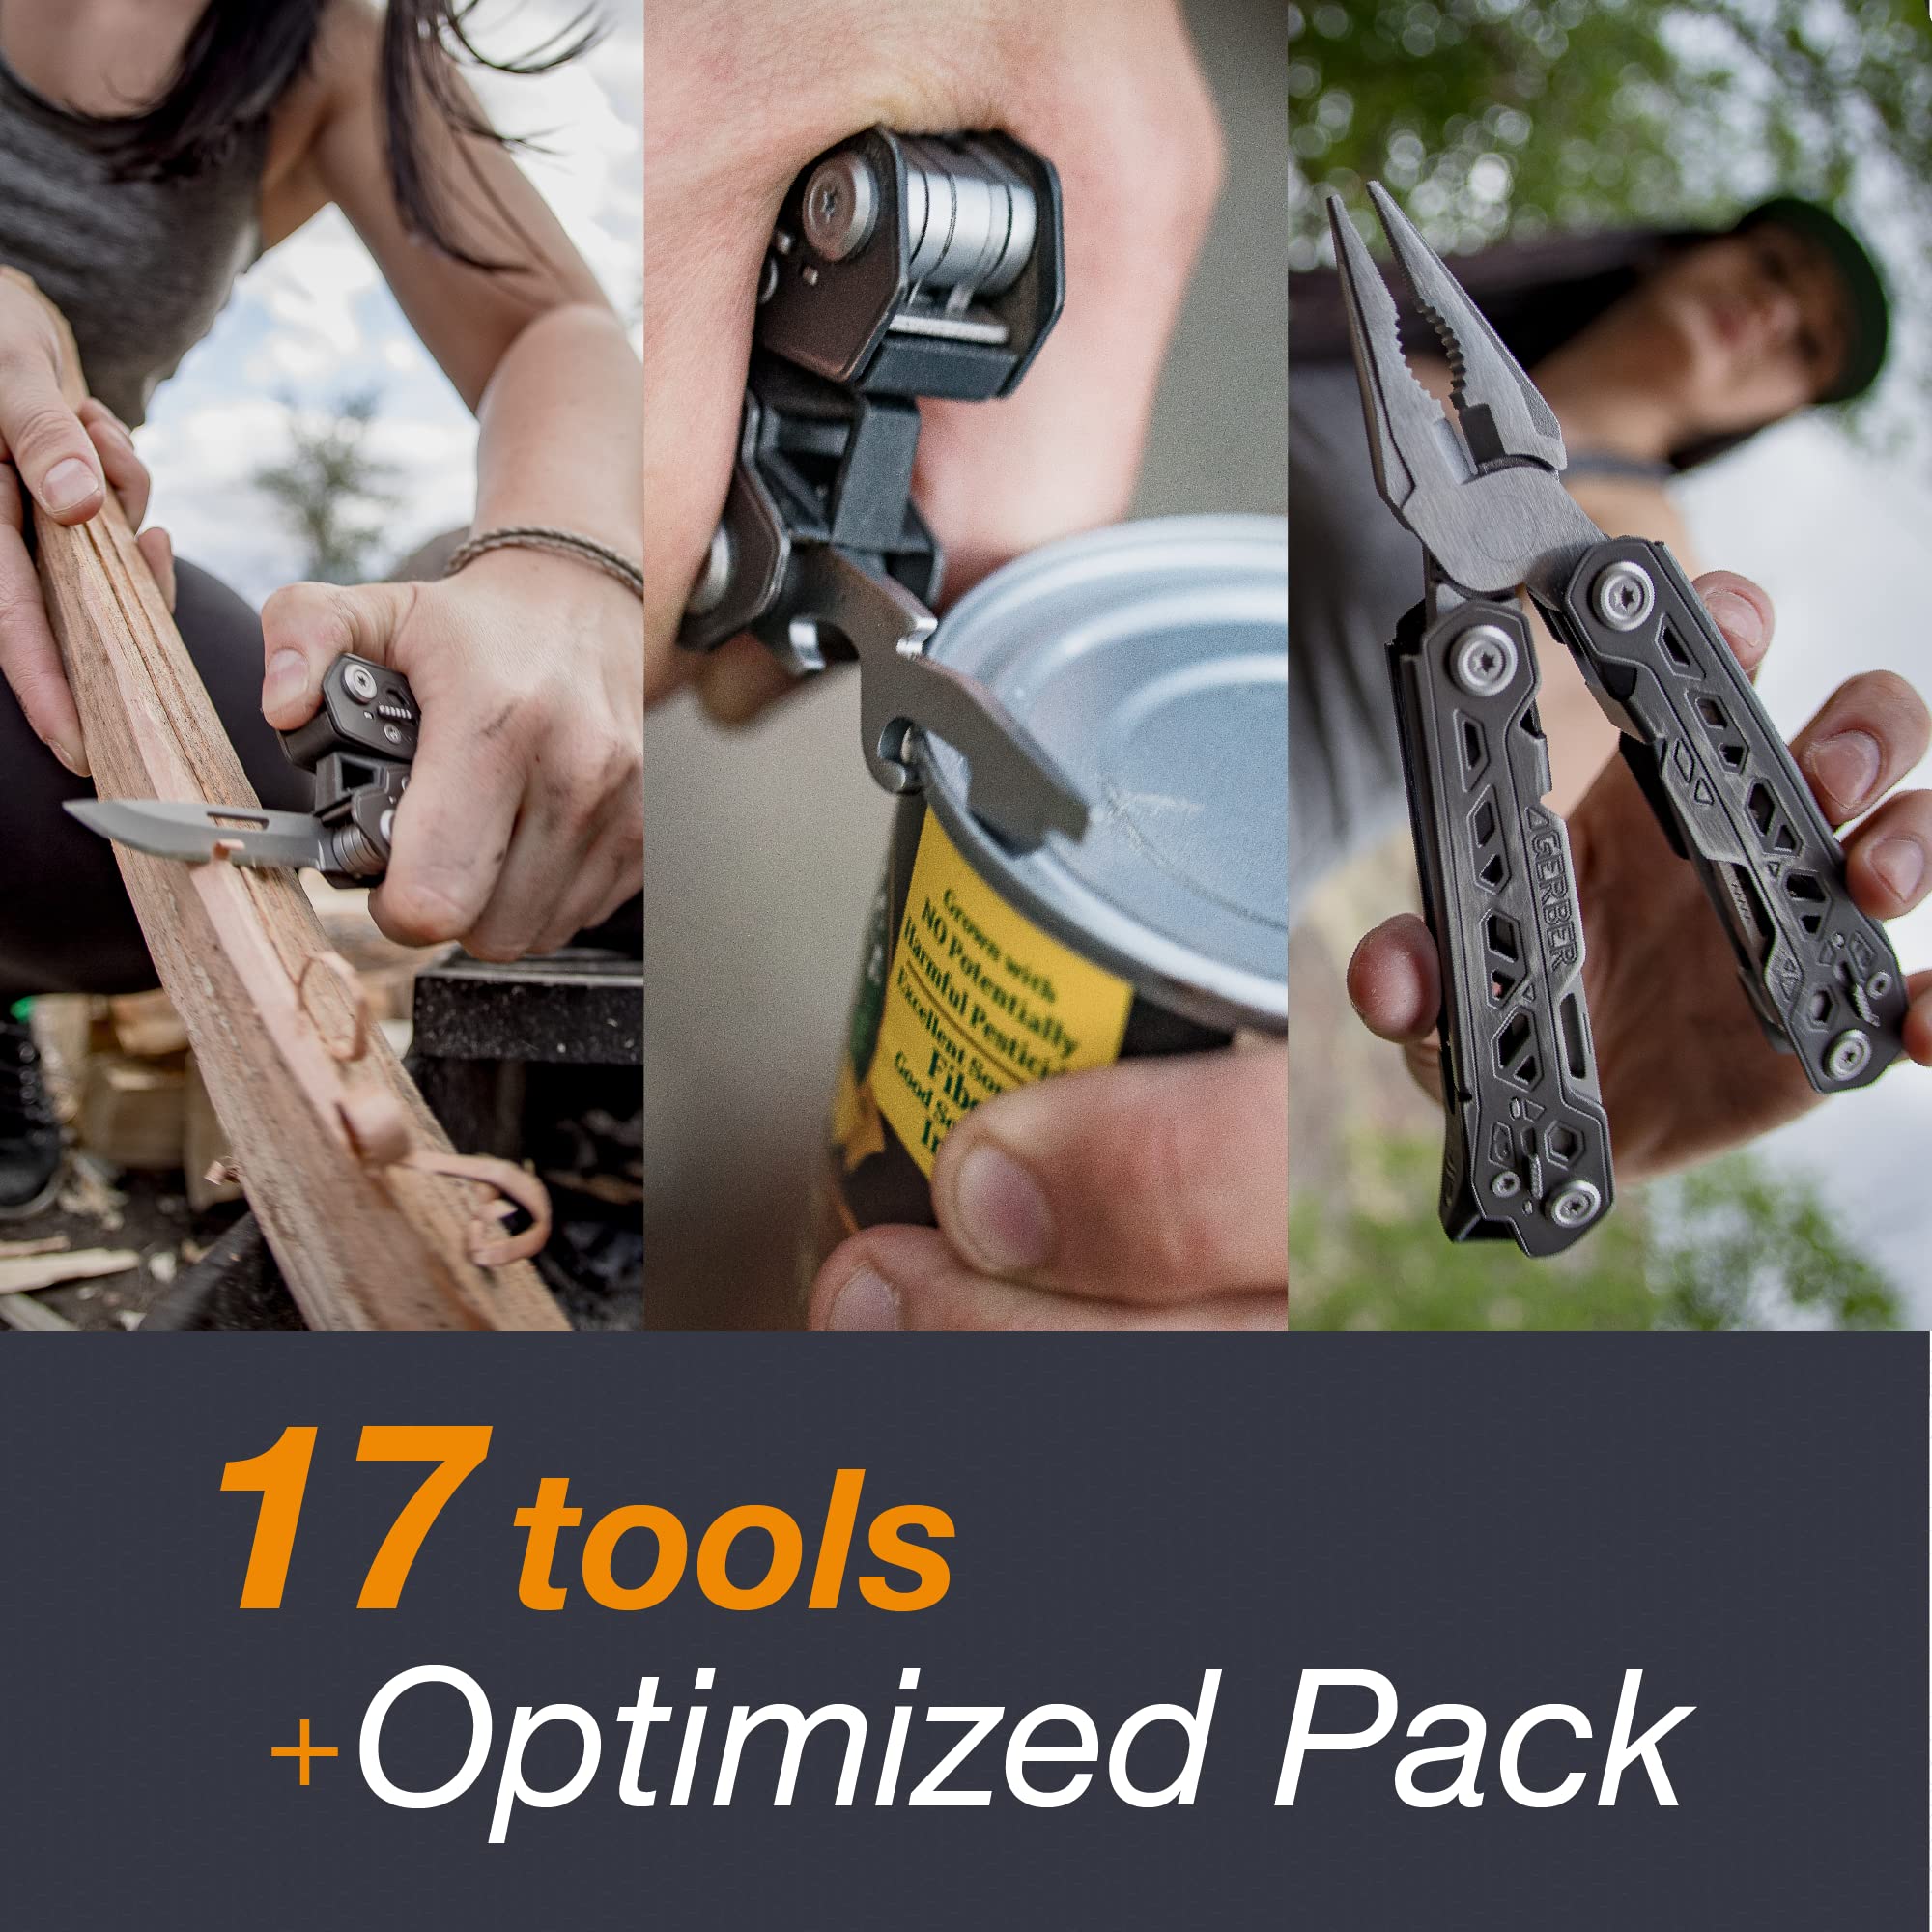 Gerber Gear Truss 17-in-1 Needle Nose Pliers Multi-tool with Sheath - Multi-Plier, Pocket Knife, Serrated Blade, Screwdriver, Bottle Opener - EDC Gear and Equipment - Gray